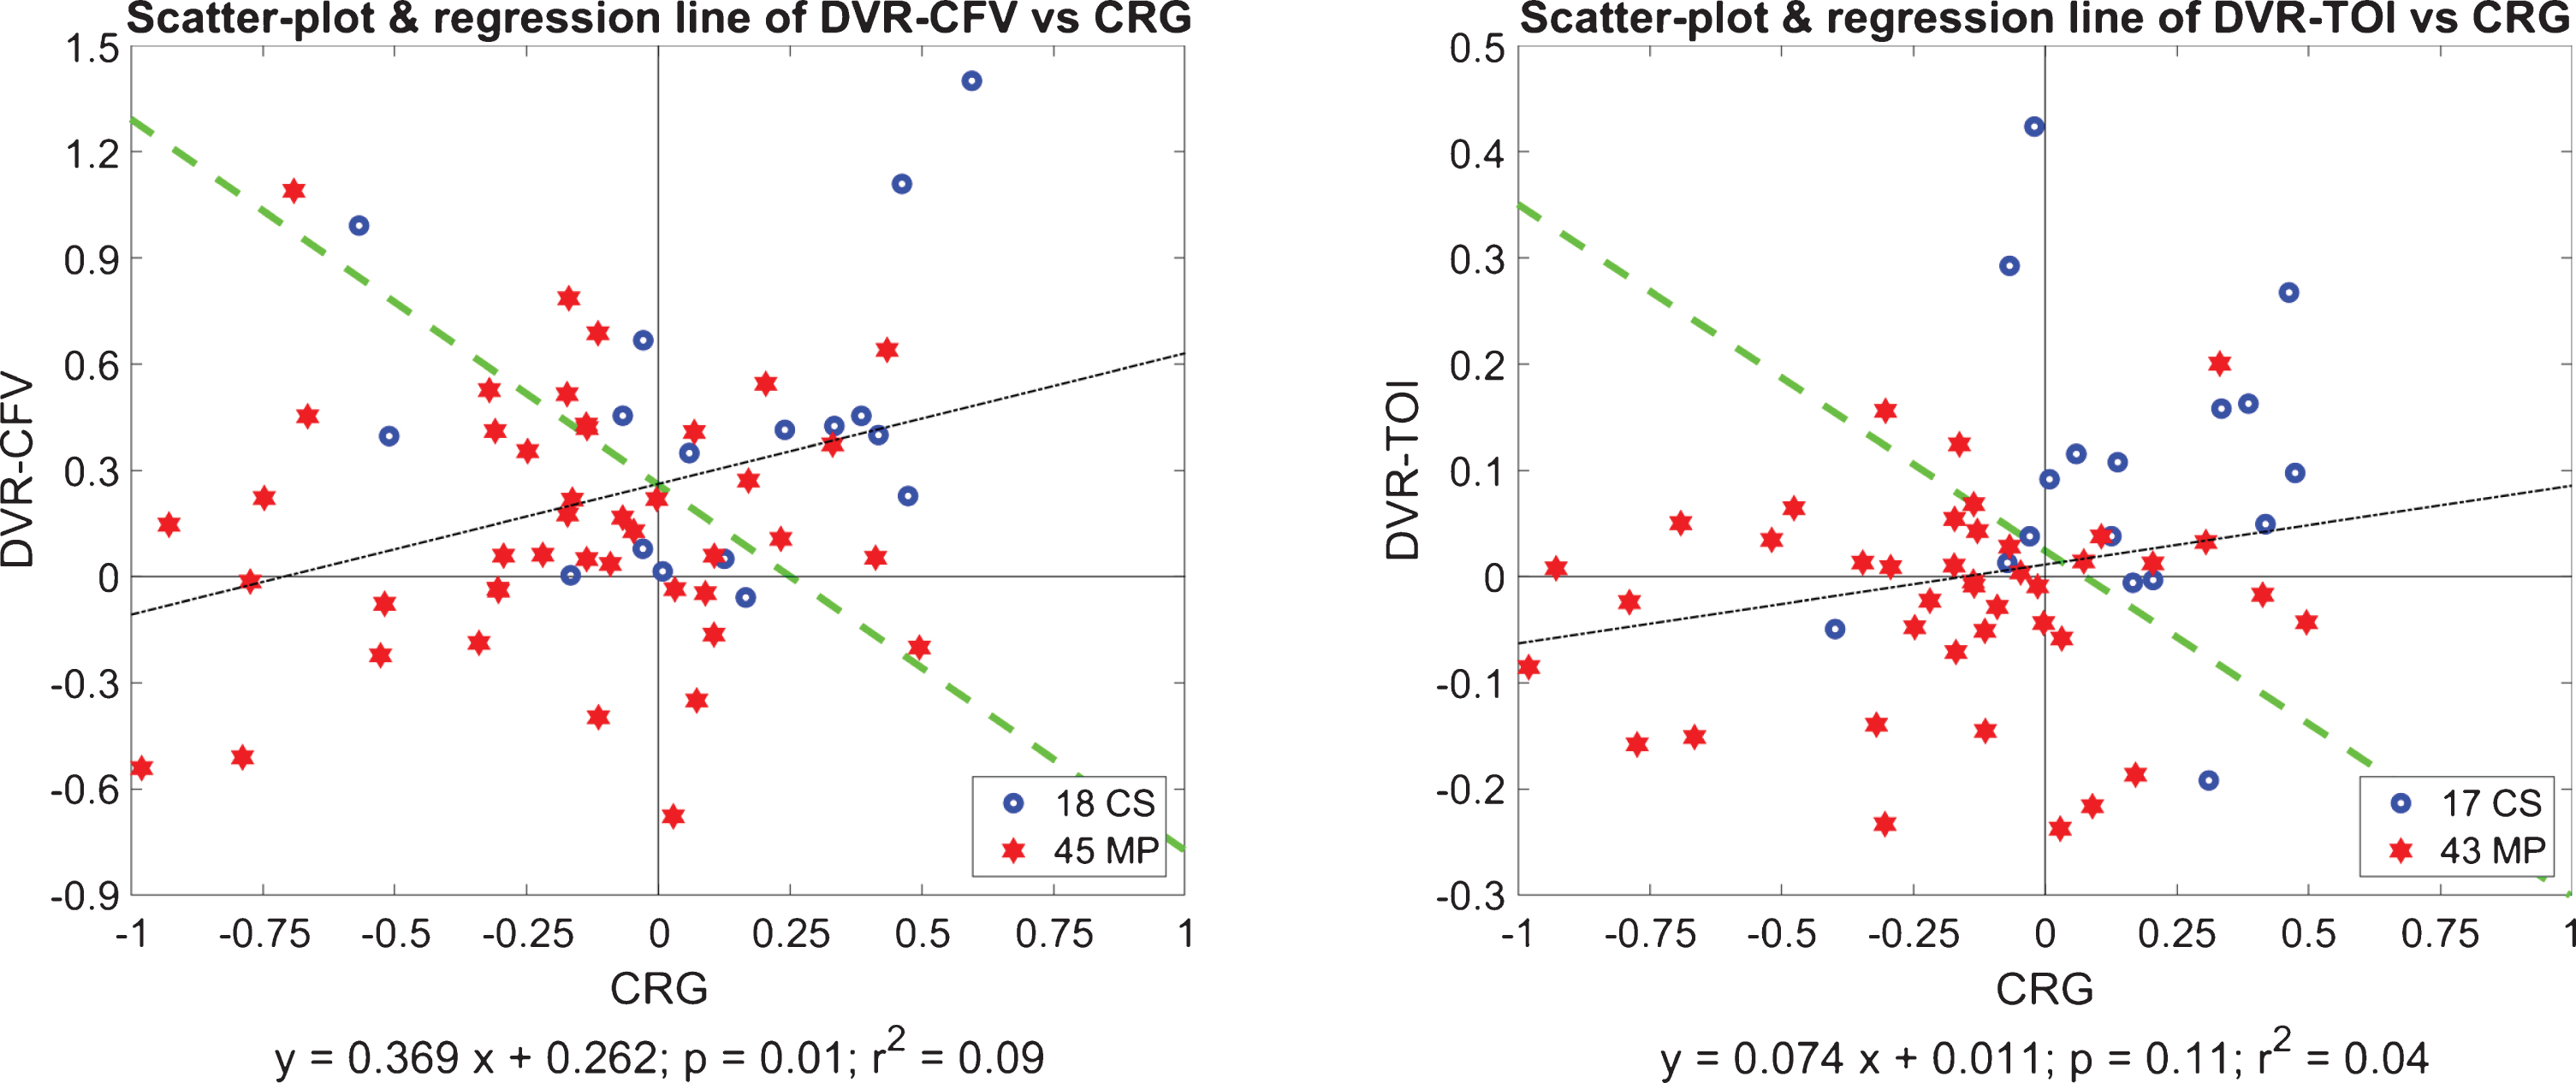 Regression lines of the scatter-plots of DVR-CFV versus CRG (left panel) and DVR-TOI versus CRG (right panel), for all MP (red stars) and CS (blue circles). The indices DVR-CFV and CRG have significant correlation (p = 0.0146), but the indices DVR-TOI and CRG do not (p = 0.1066). The Fisher Discriminants are also plotted as green lines (see text).